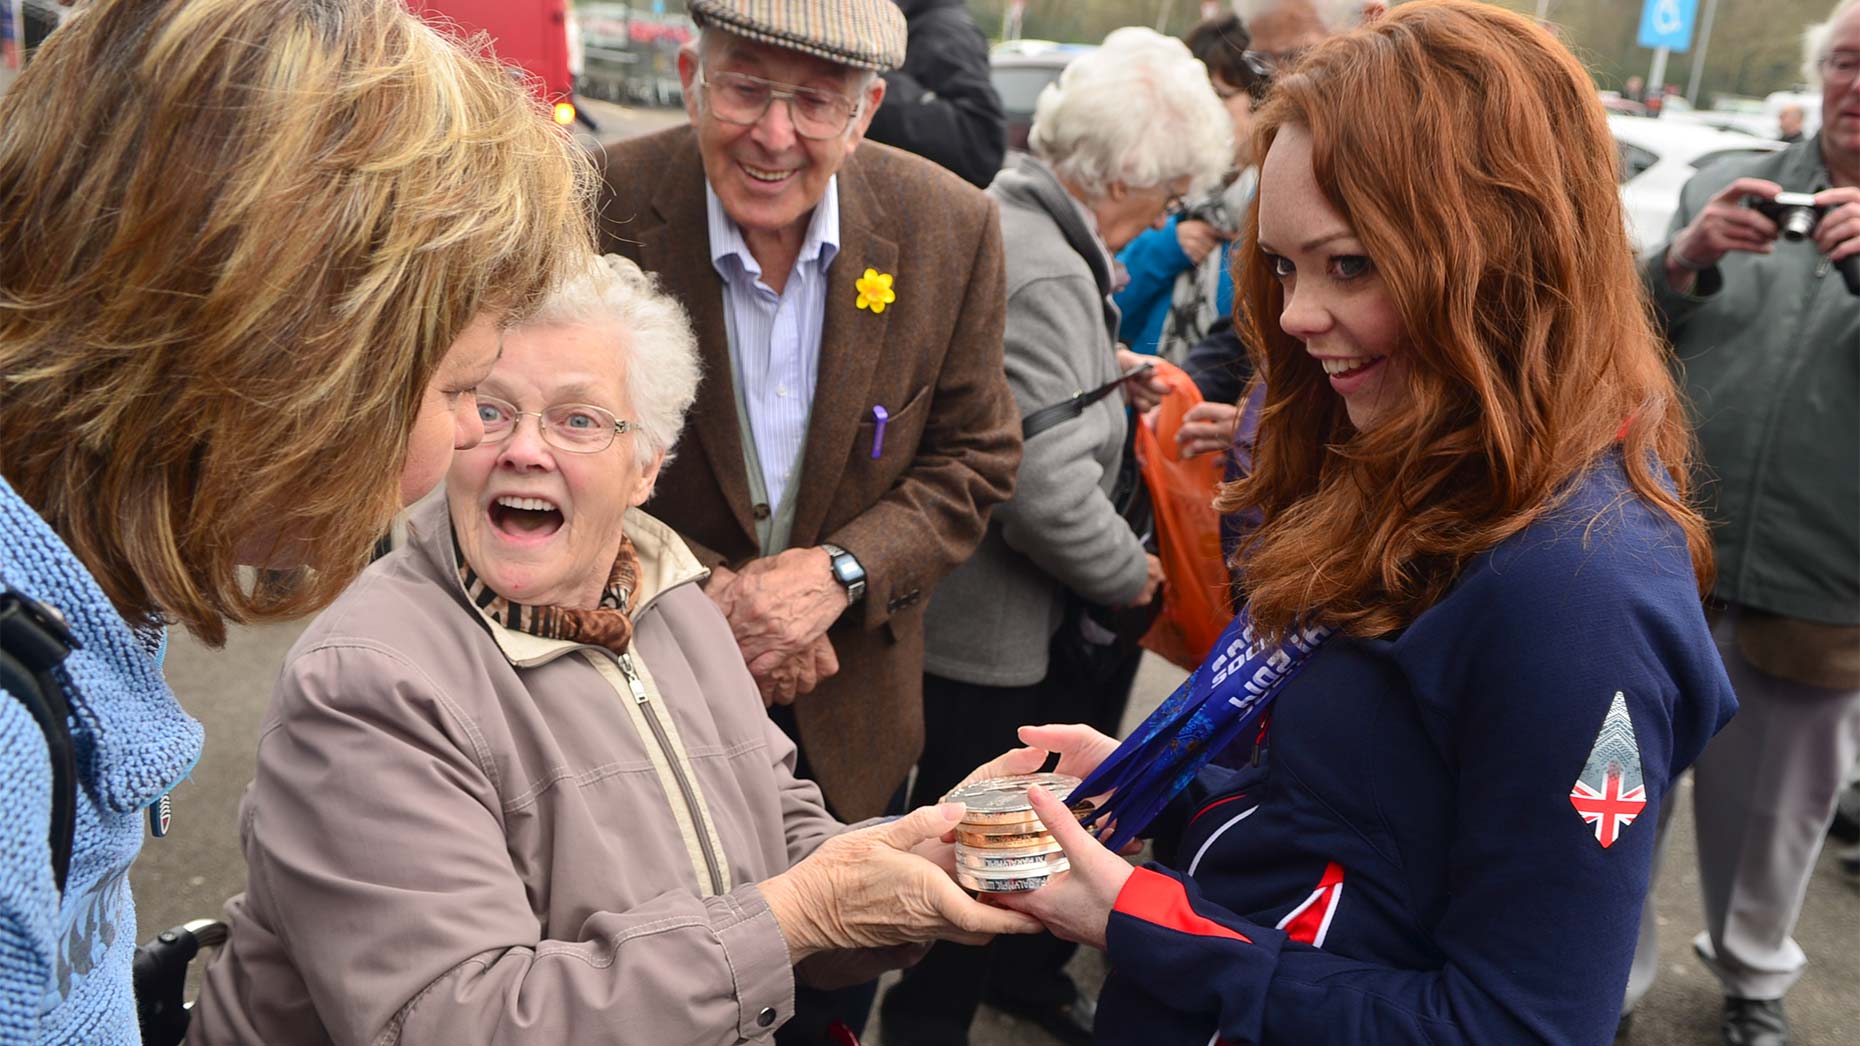 People at Sainsbury's in Lincoln were excited to meet Jade and hold her medals. Photo: Steve Smailes for The Lincolnite